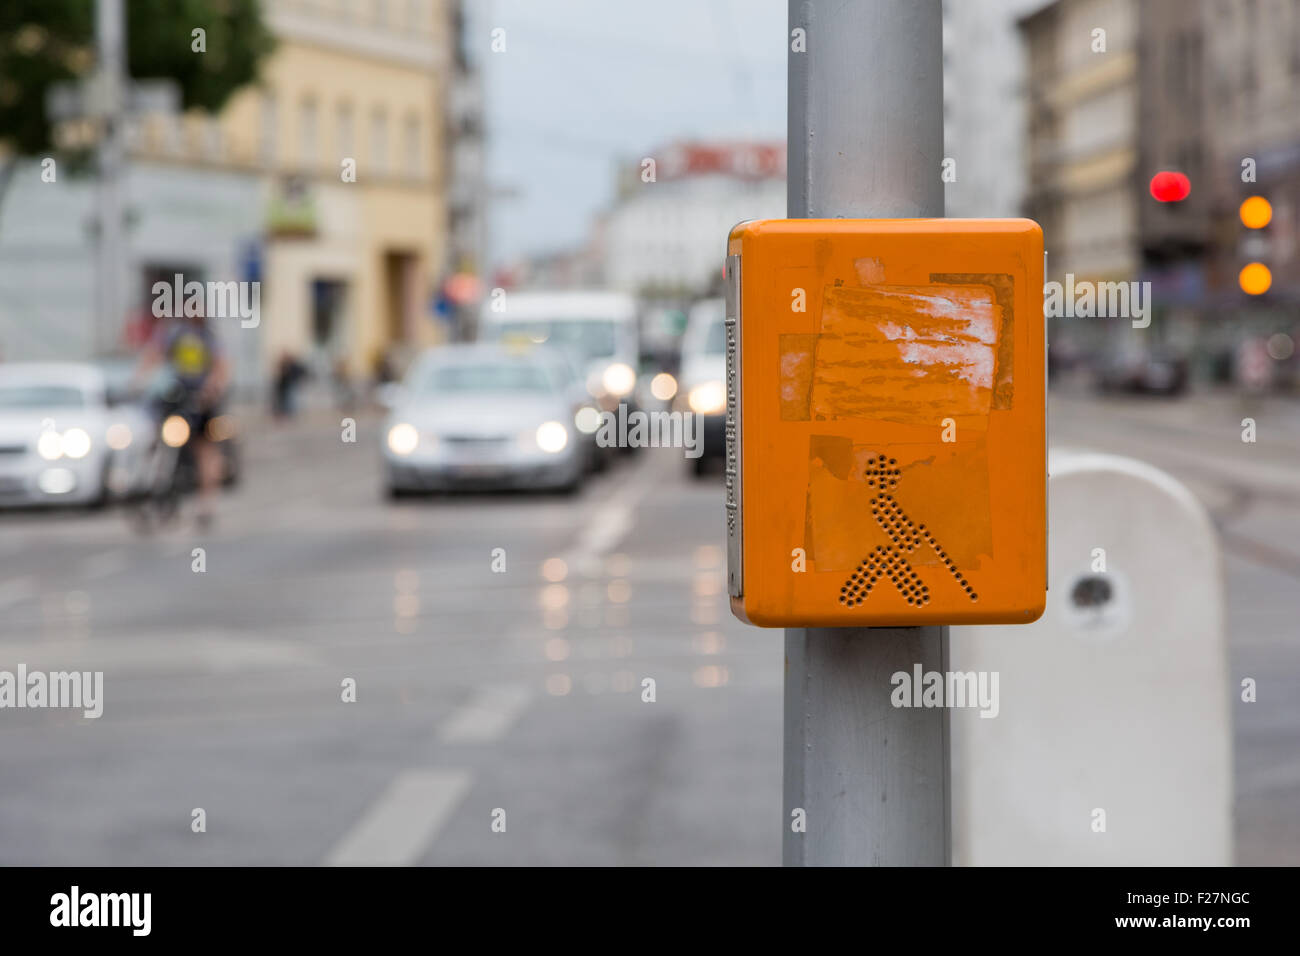 An orange acoustic signal system for blind people on a zebra crossing Stock Photo